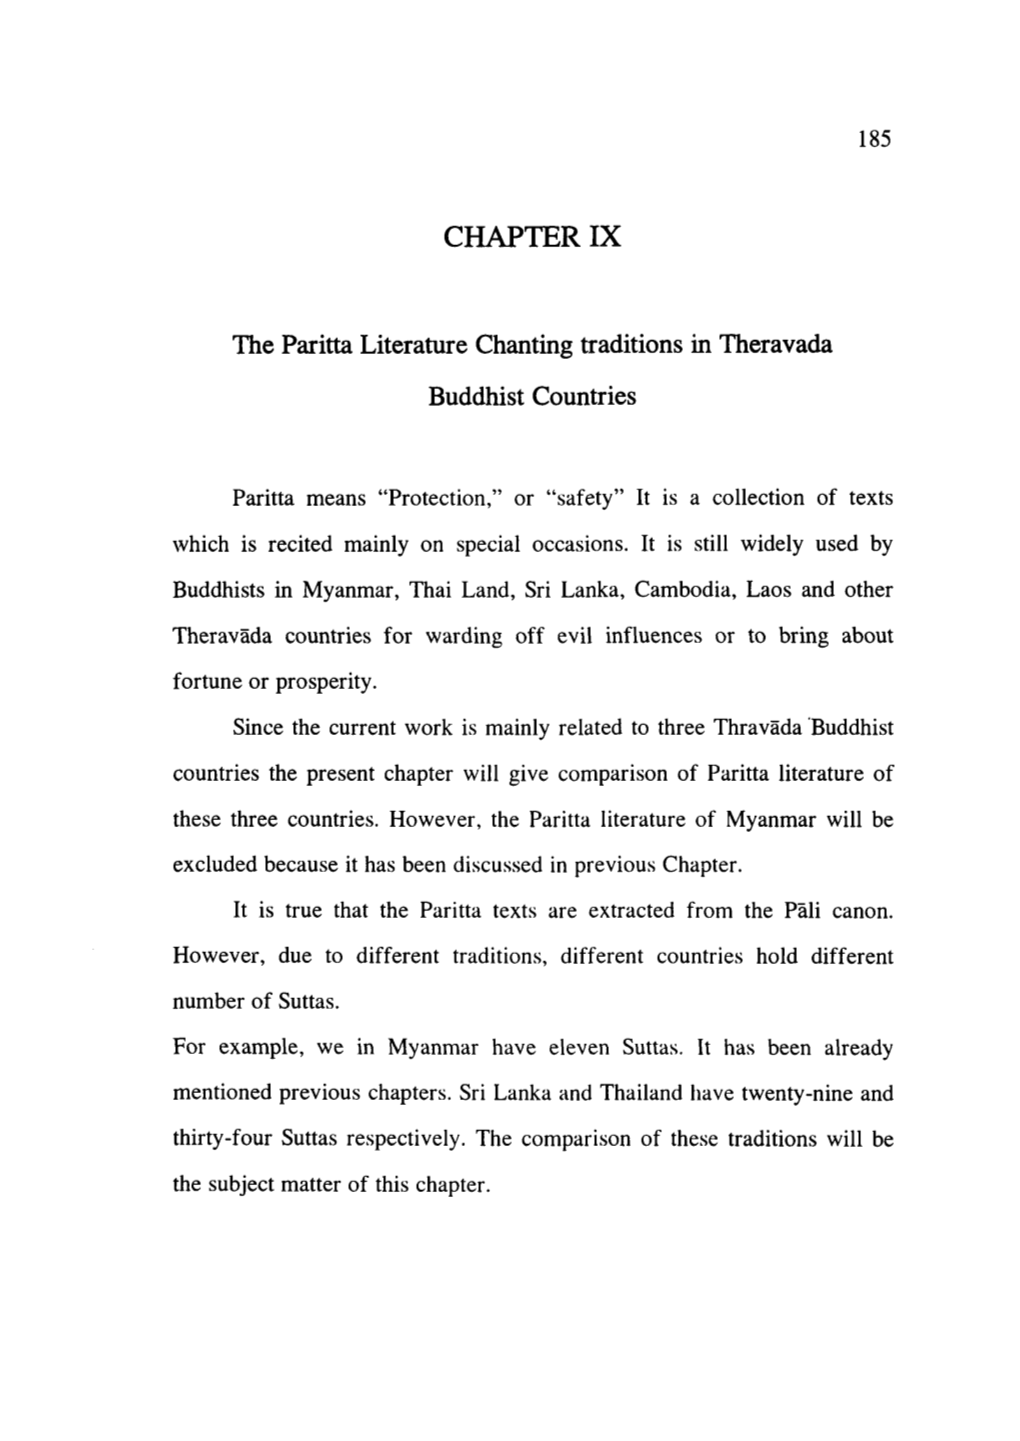 CHAPTER IX the Paritta Literature Chanting Traditions in Theravada